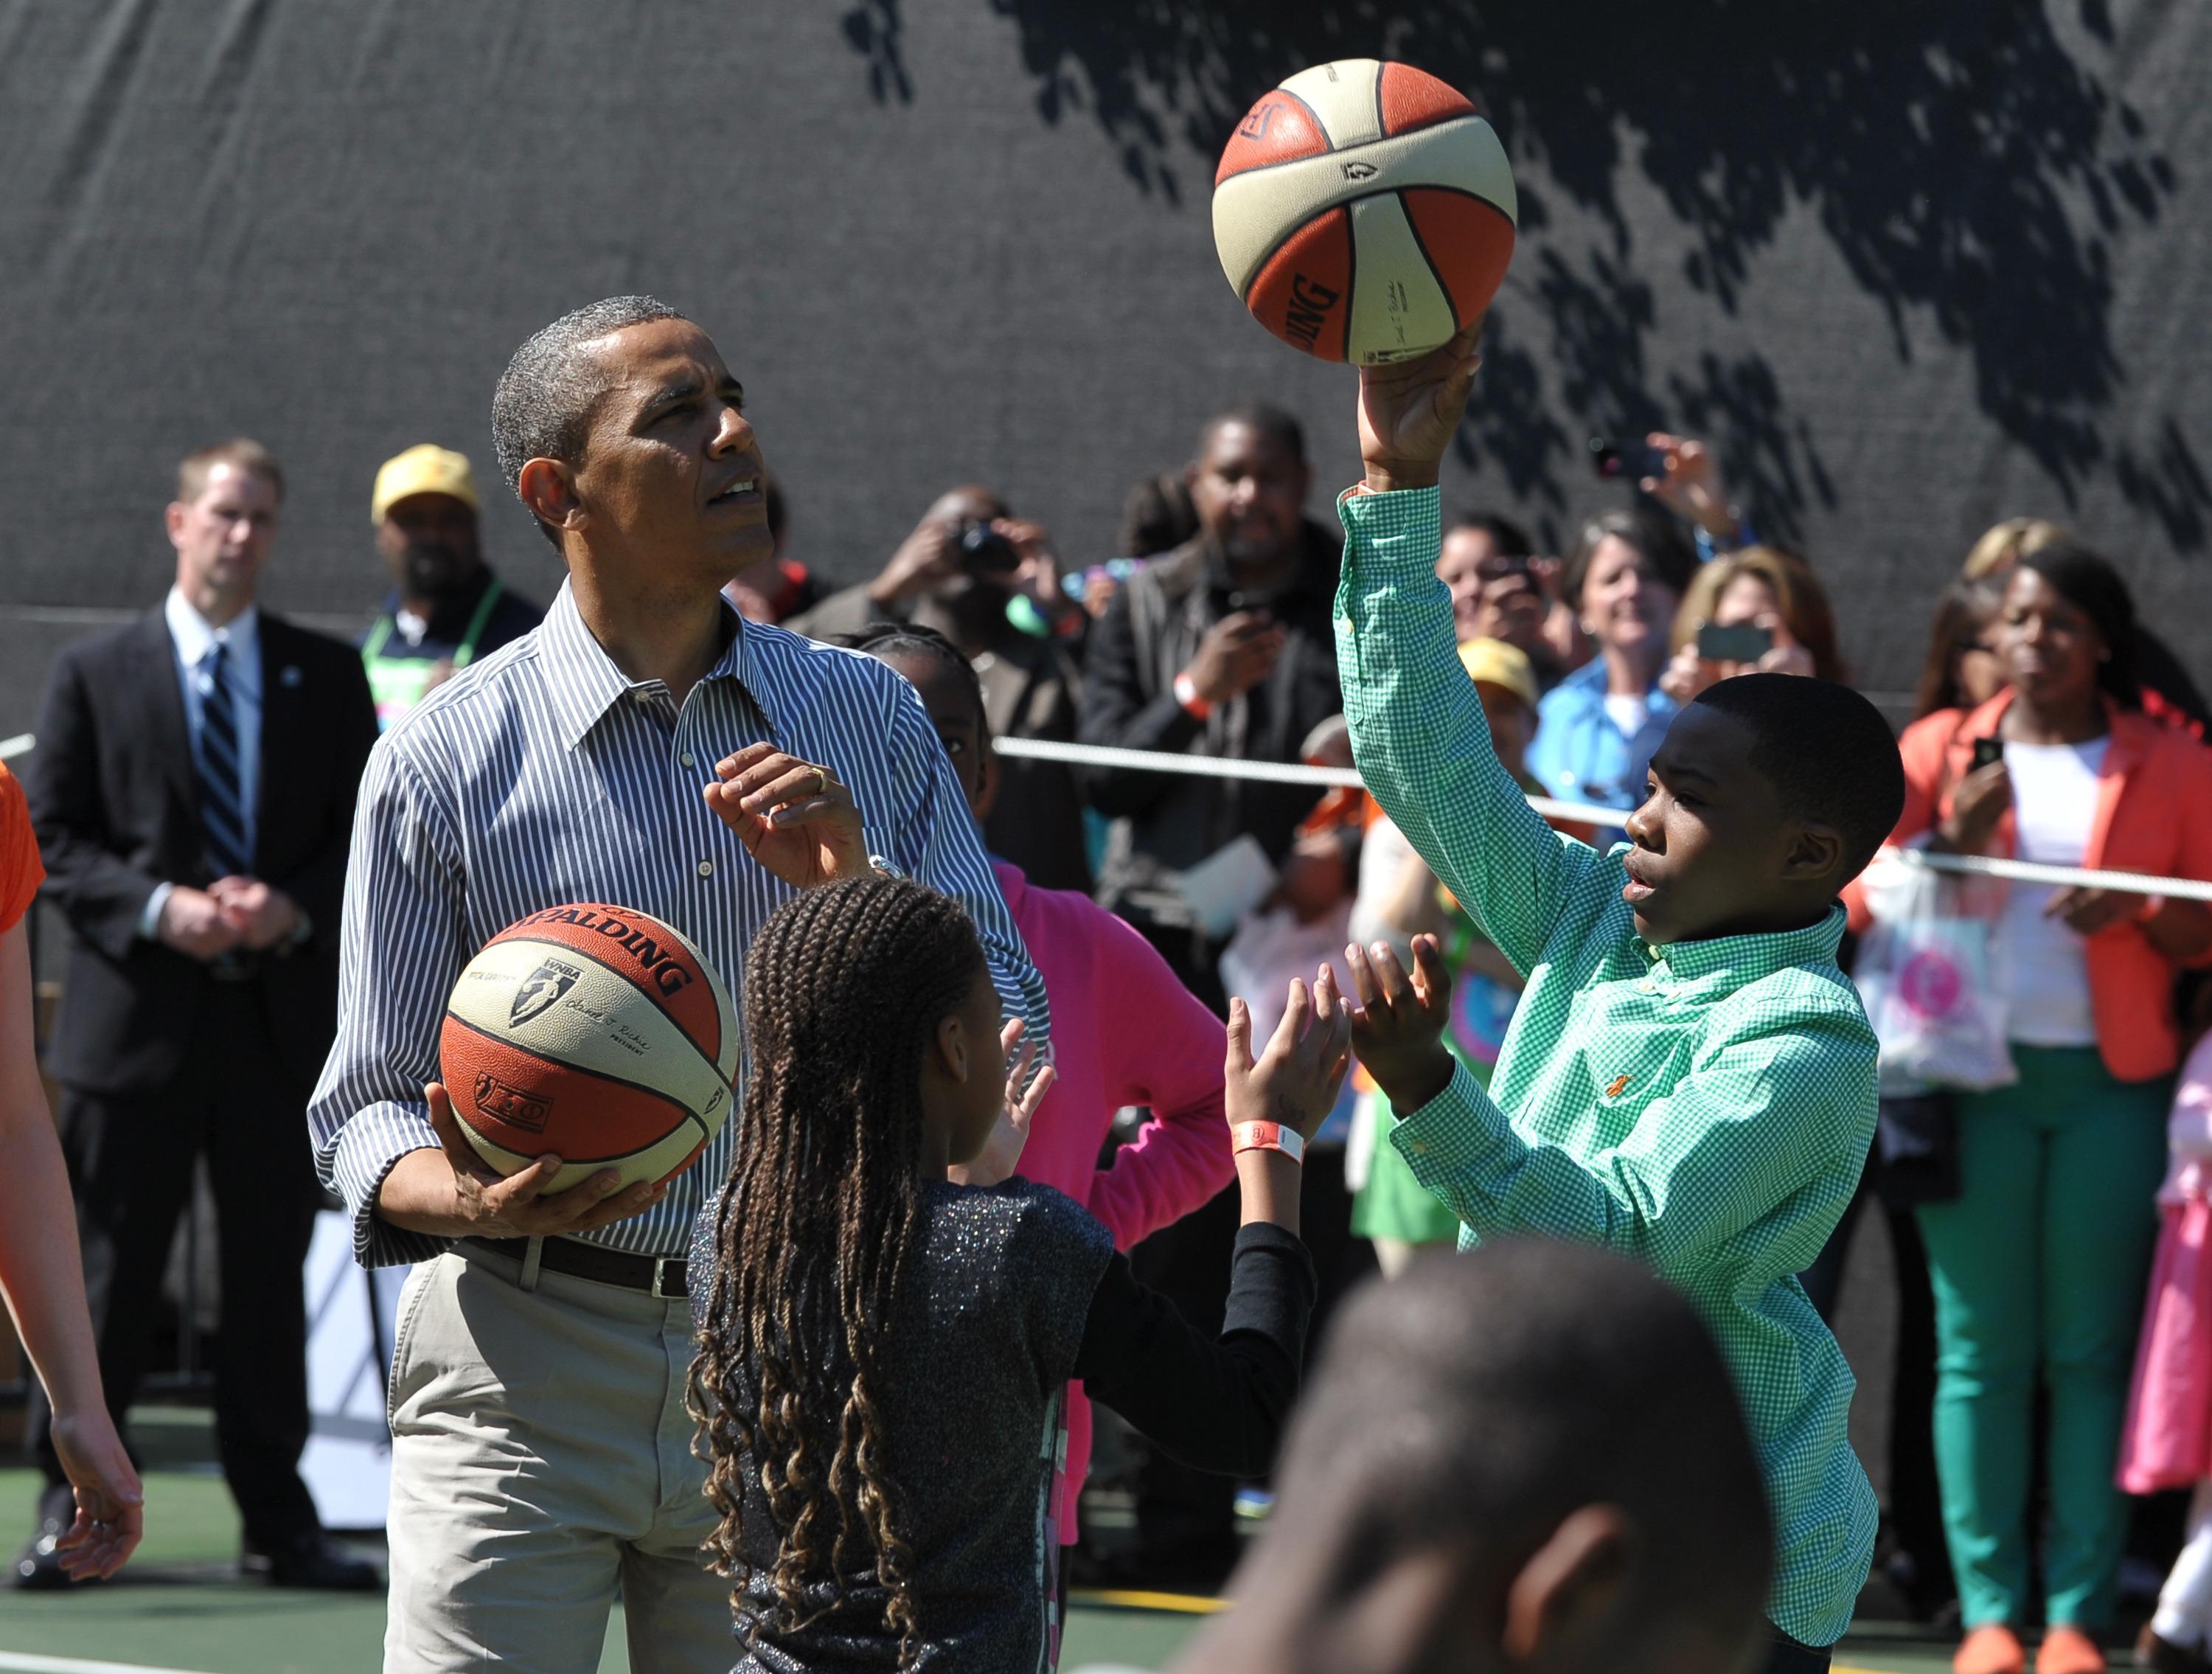 Barack Obama plays basketball with children on Eater